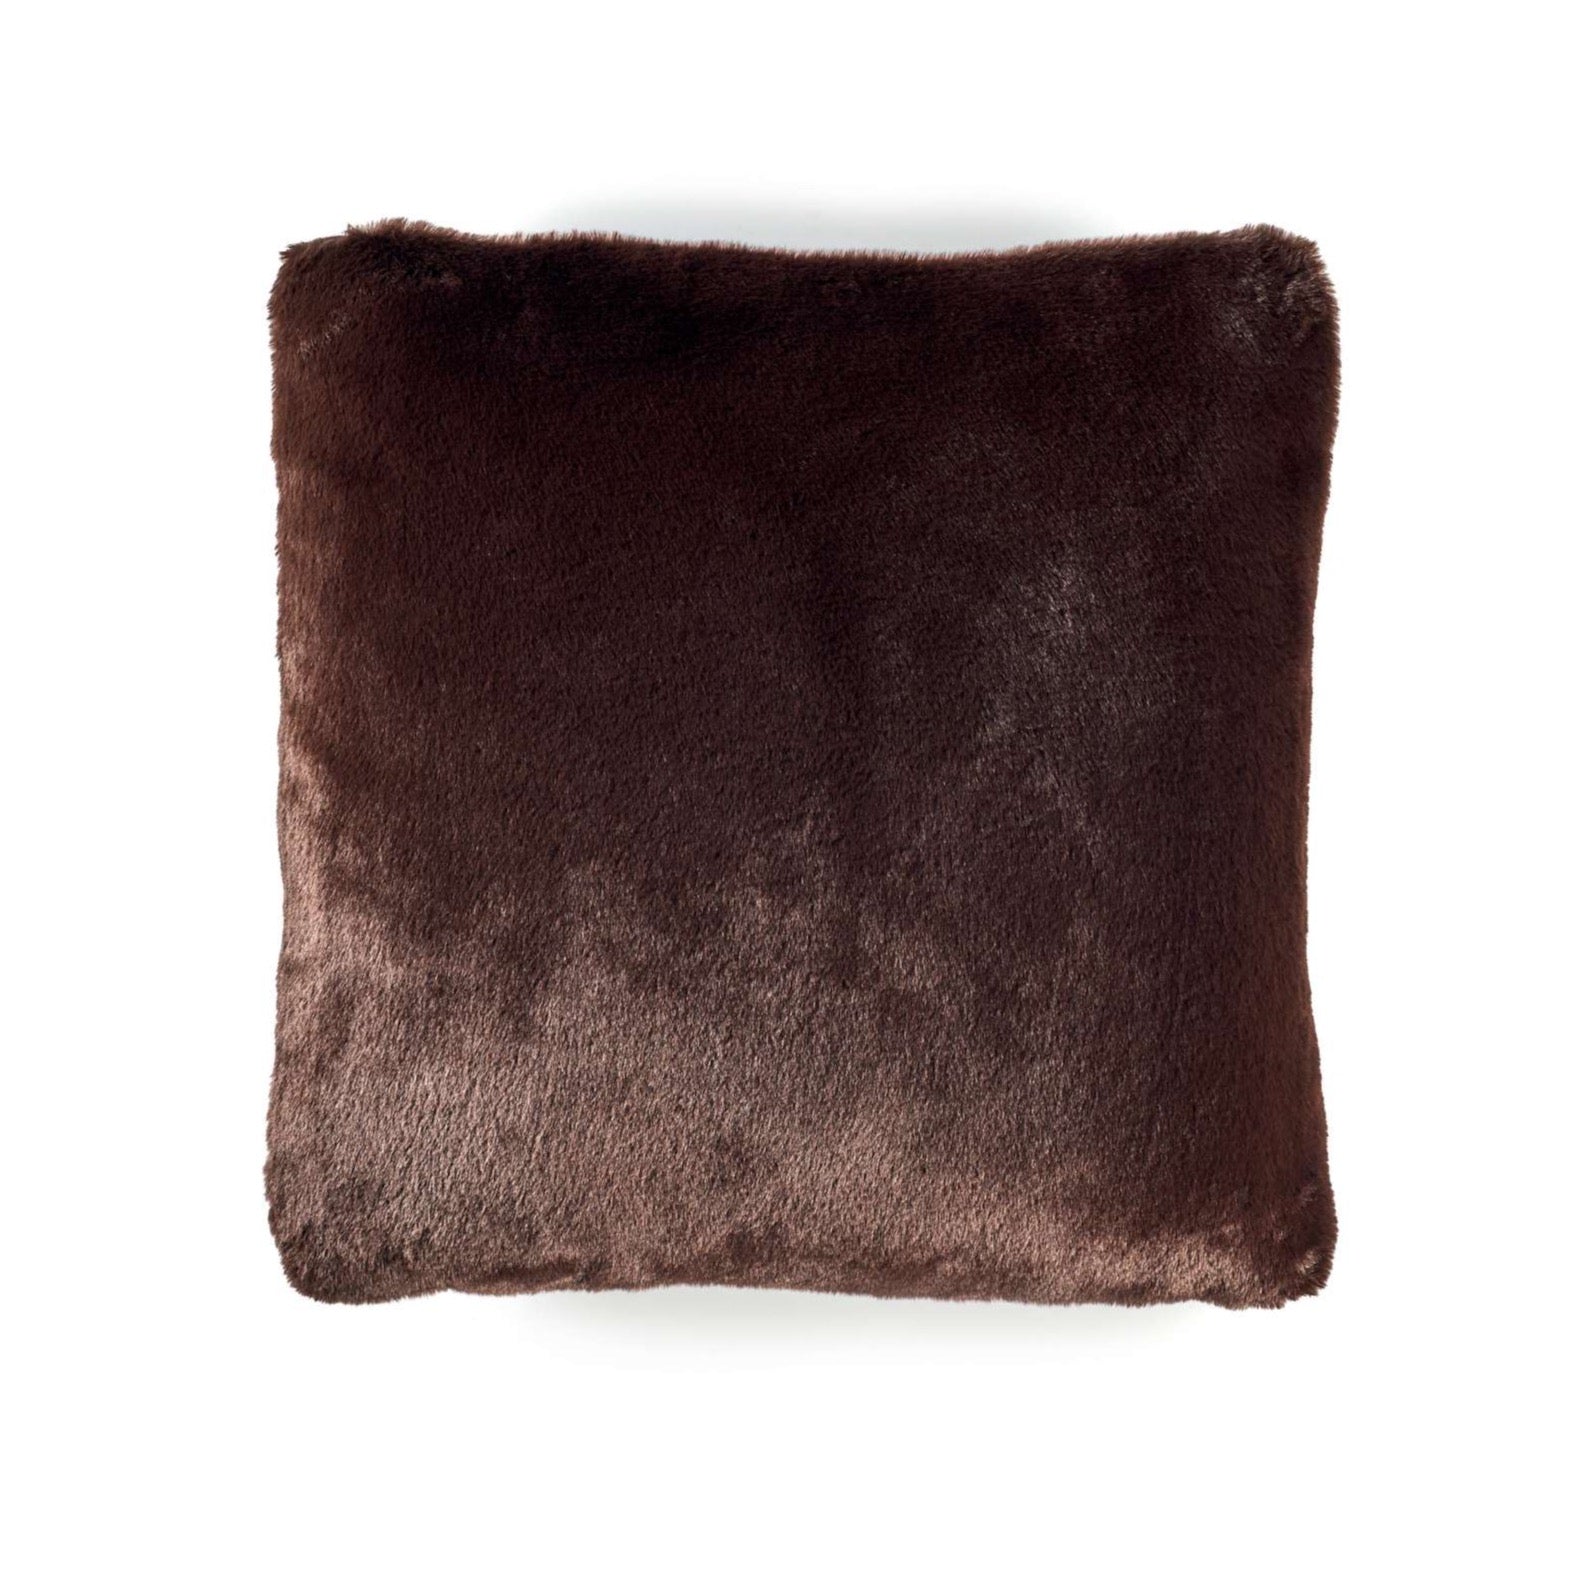 Winter CO 223 76 01 Ours Brun Square Cushion Cover